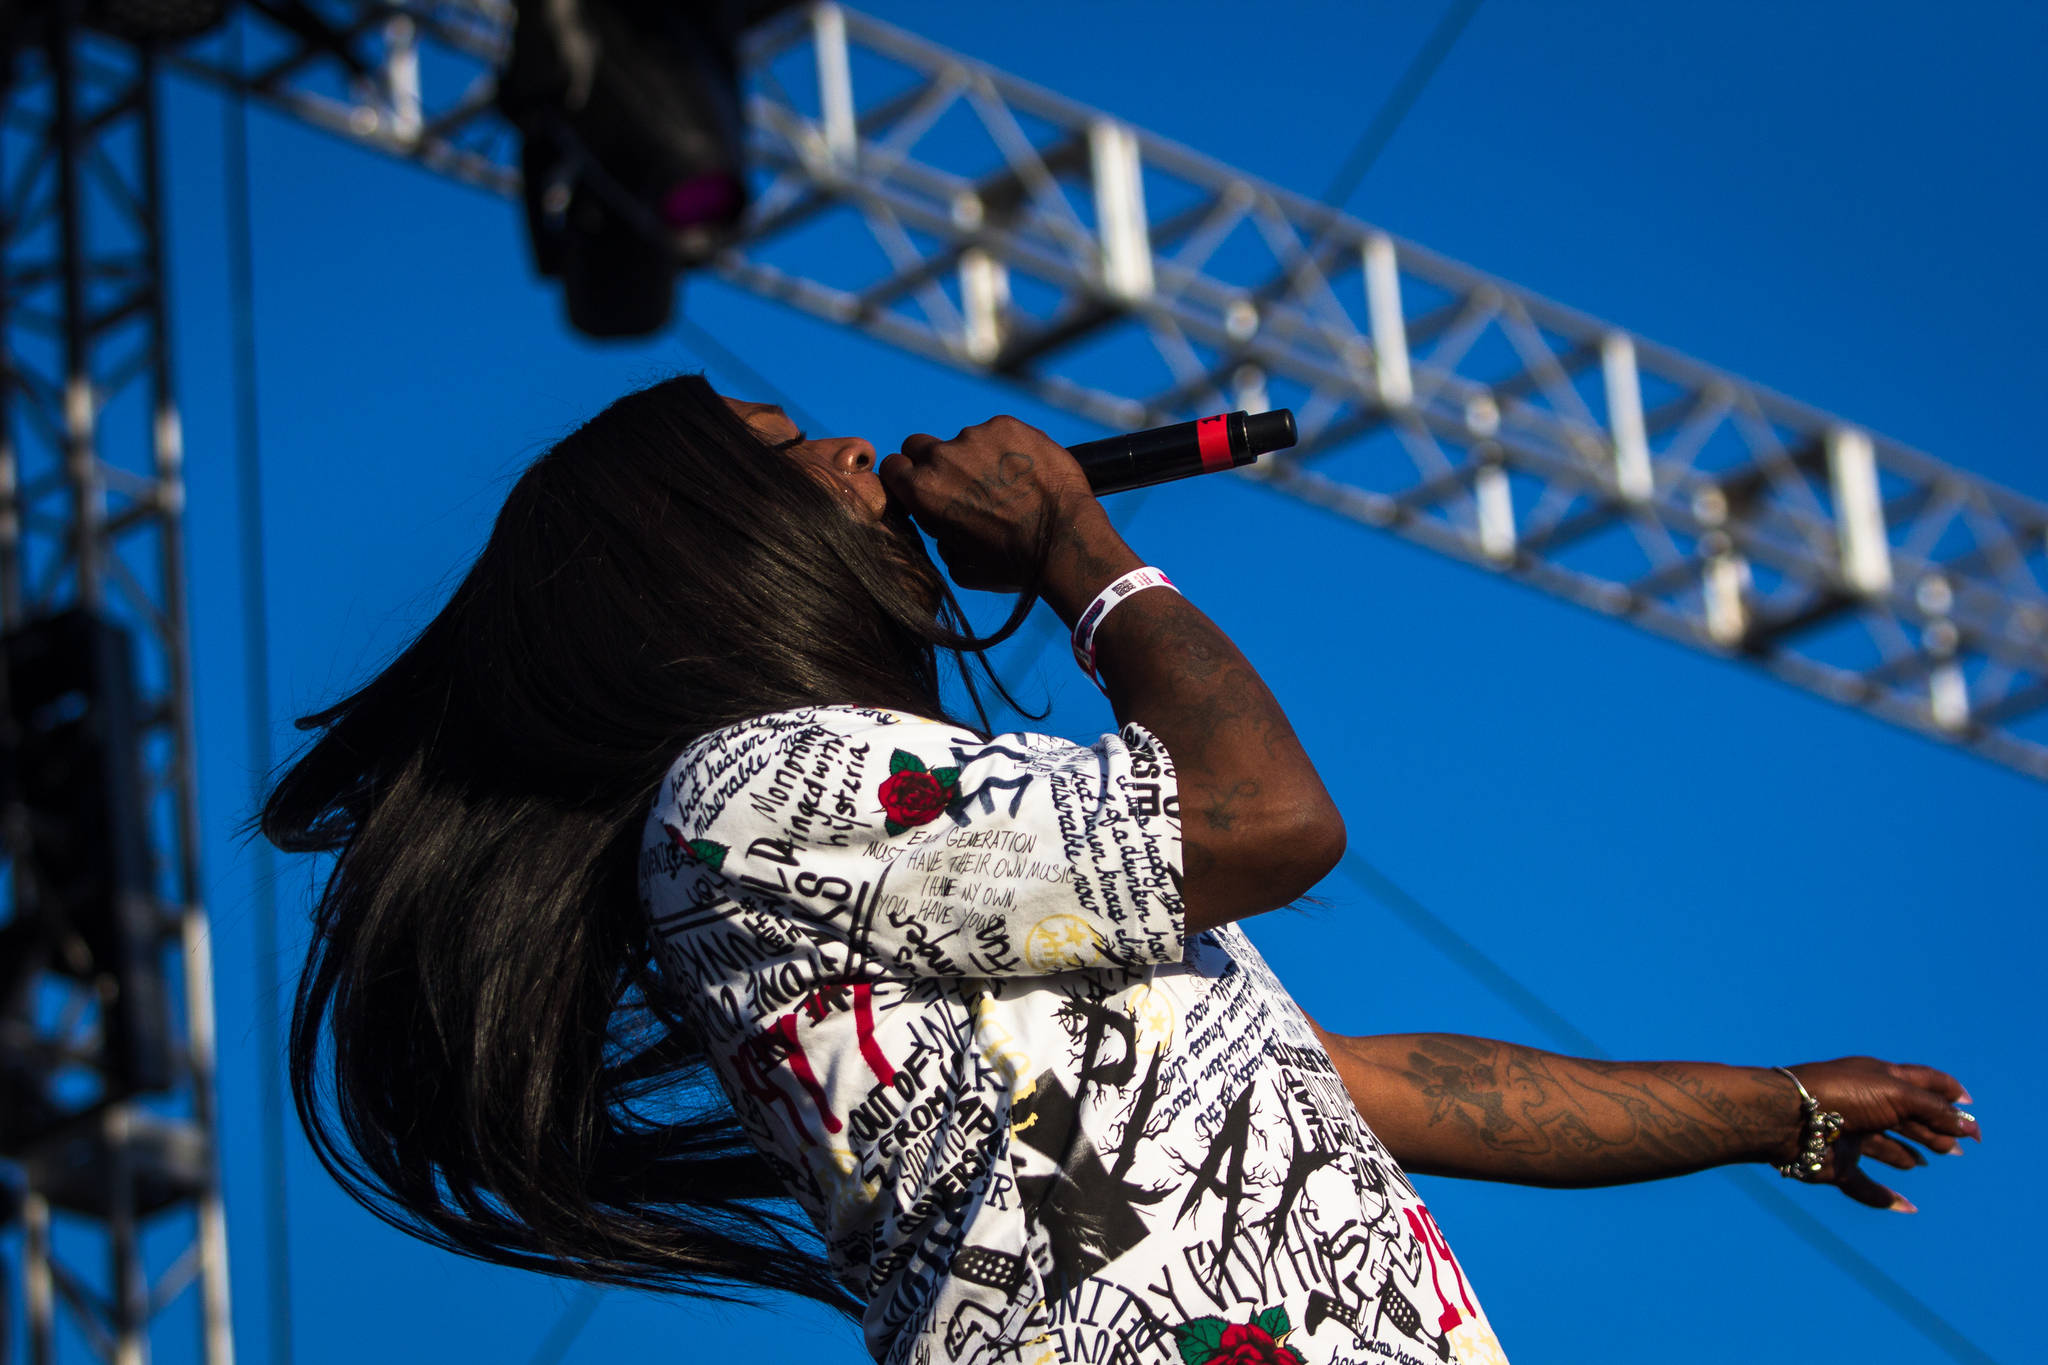 Big Freedia performs on the Bigfoot Stage on the first of three days during the annual Sasquatch! Music Festival on Friday, May 26, 2017 in George, Wa. (Daniella Beccaria / For the Herald )